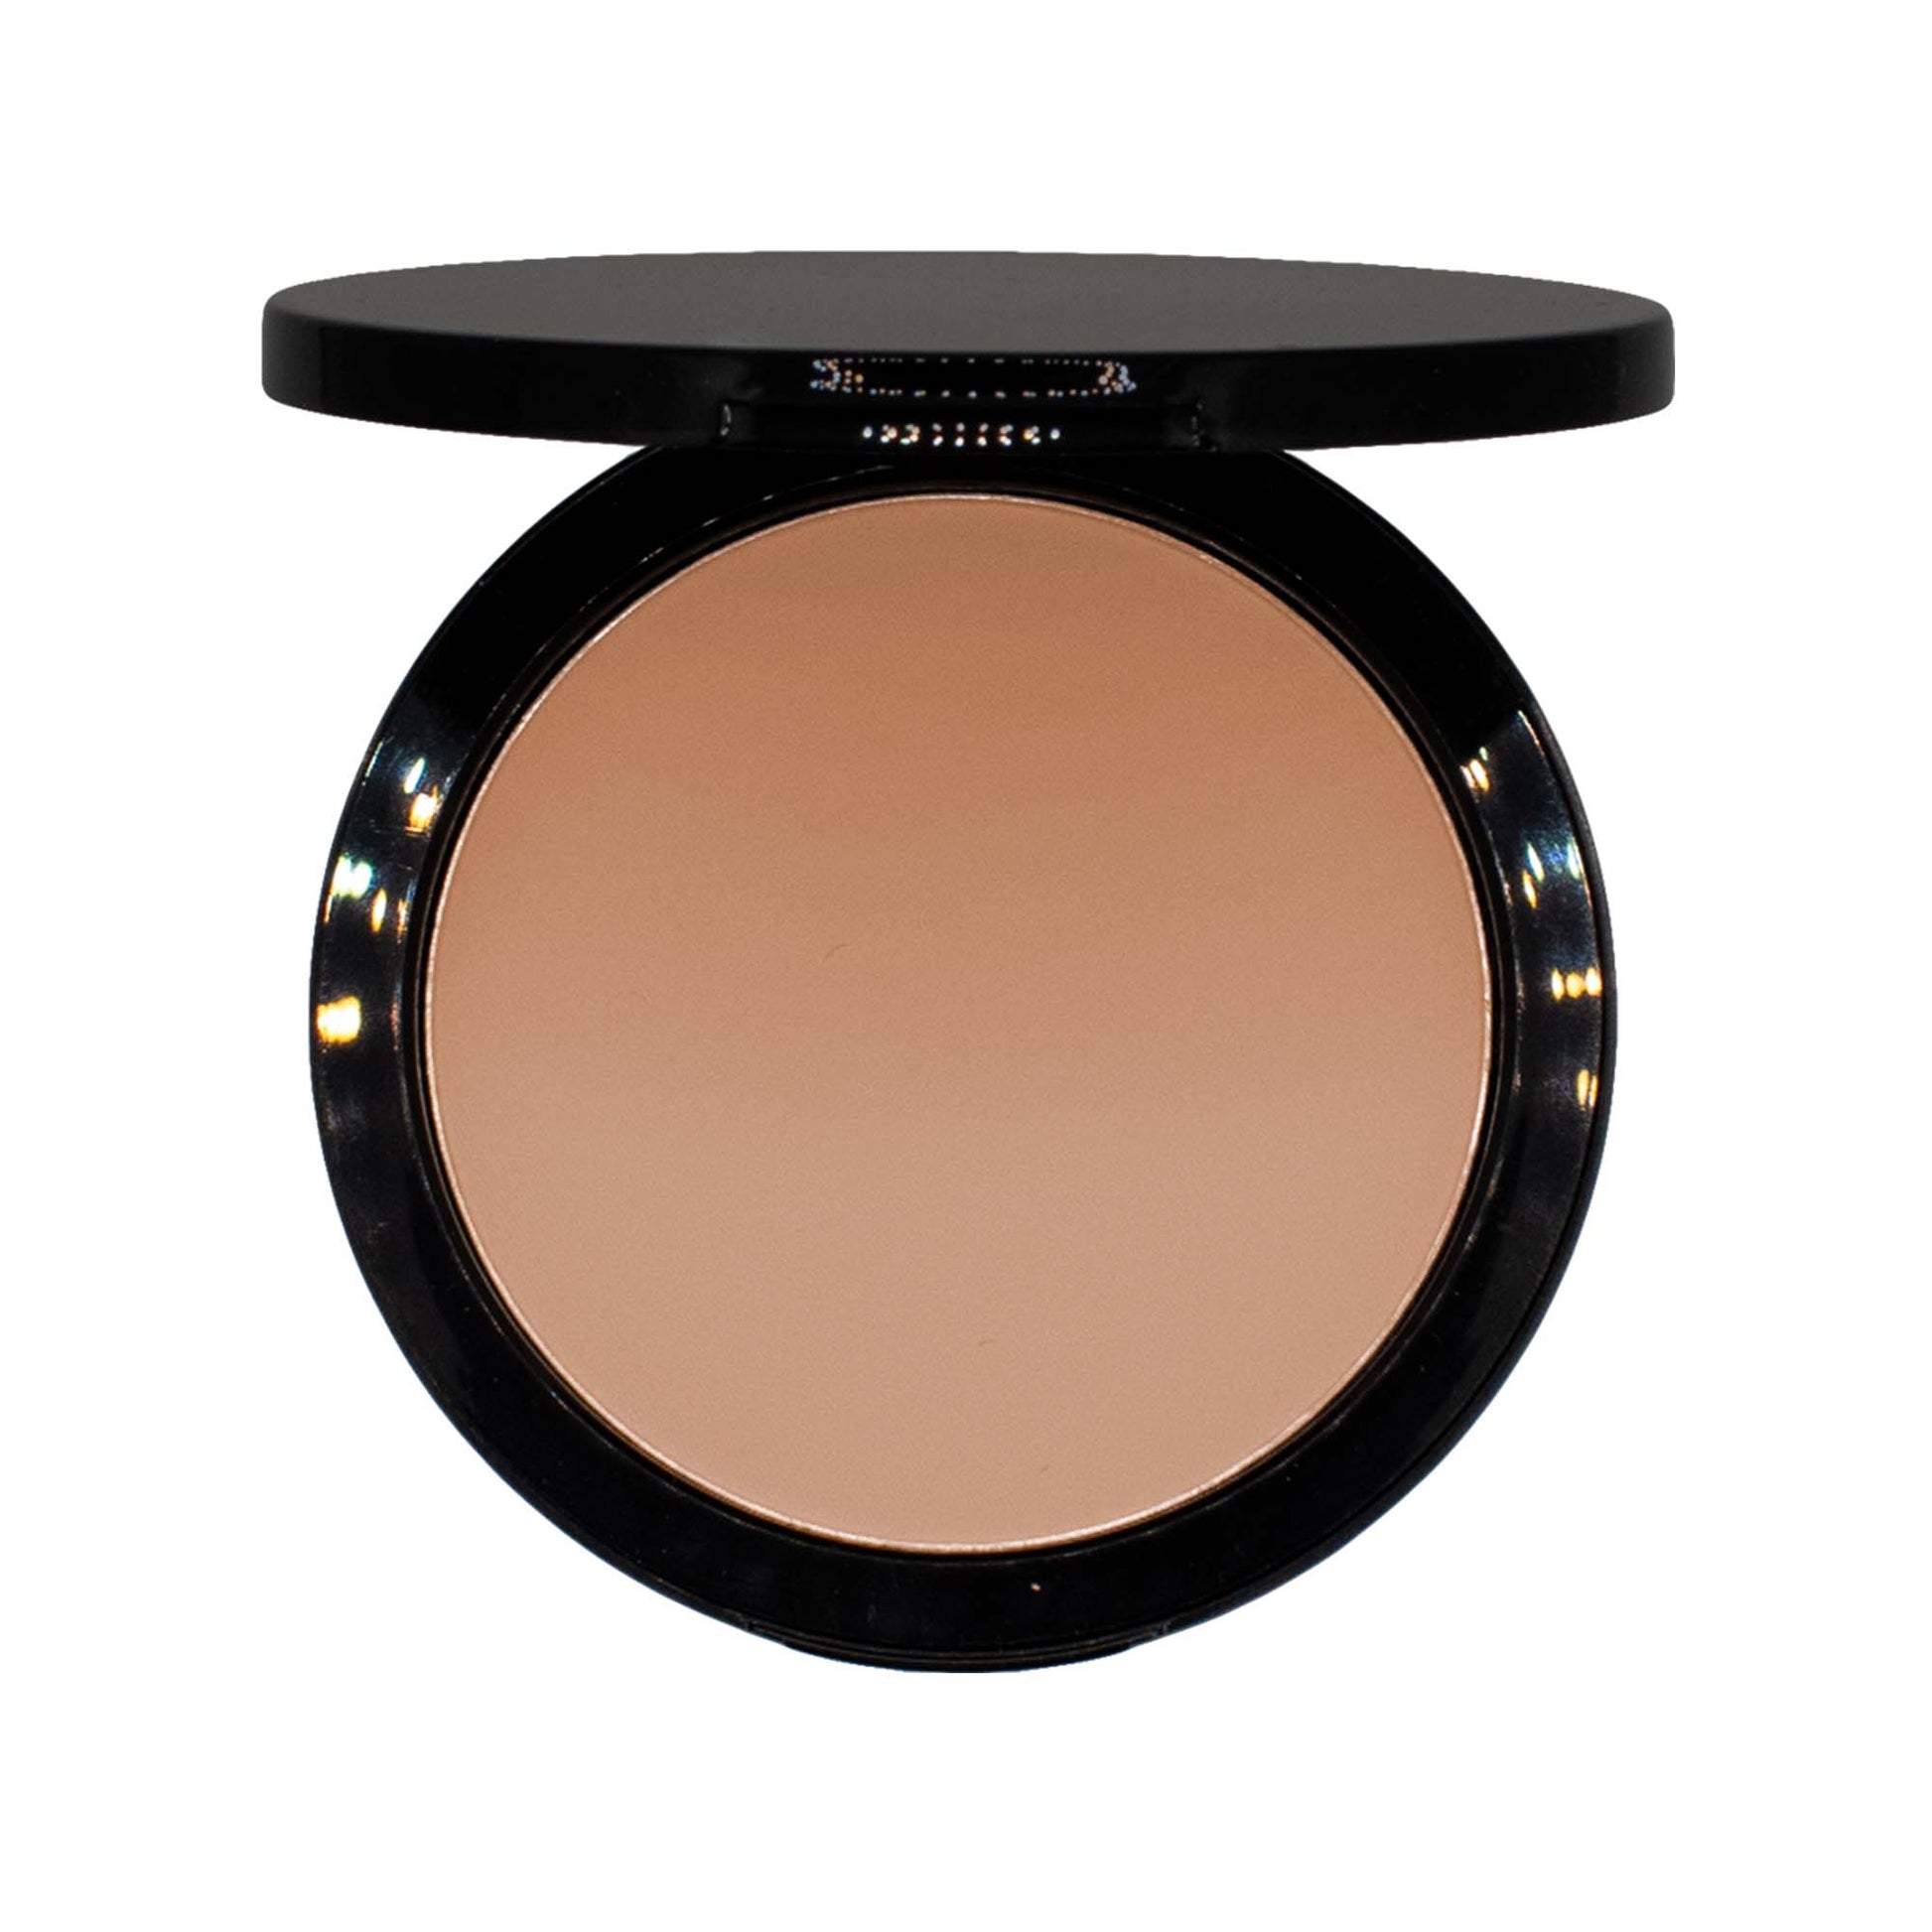 Revamp your skin with Cruisin Organics Mesa powder foundation. Use wet or dry for light to full coverage in 13 shades. Perfect for any climate- sunny Florida to snowy New York to abroad. Get a convenient glow on the go with our compact design!